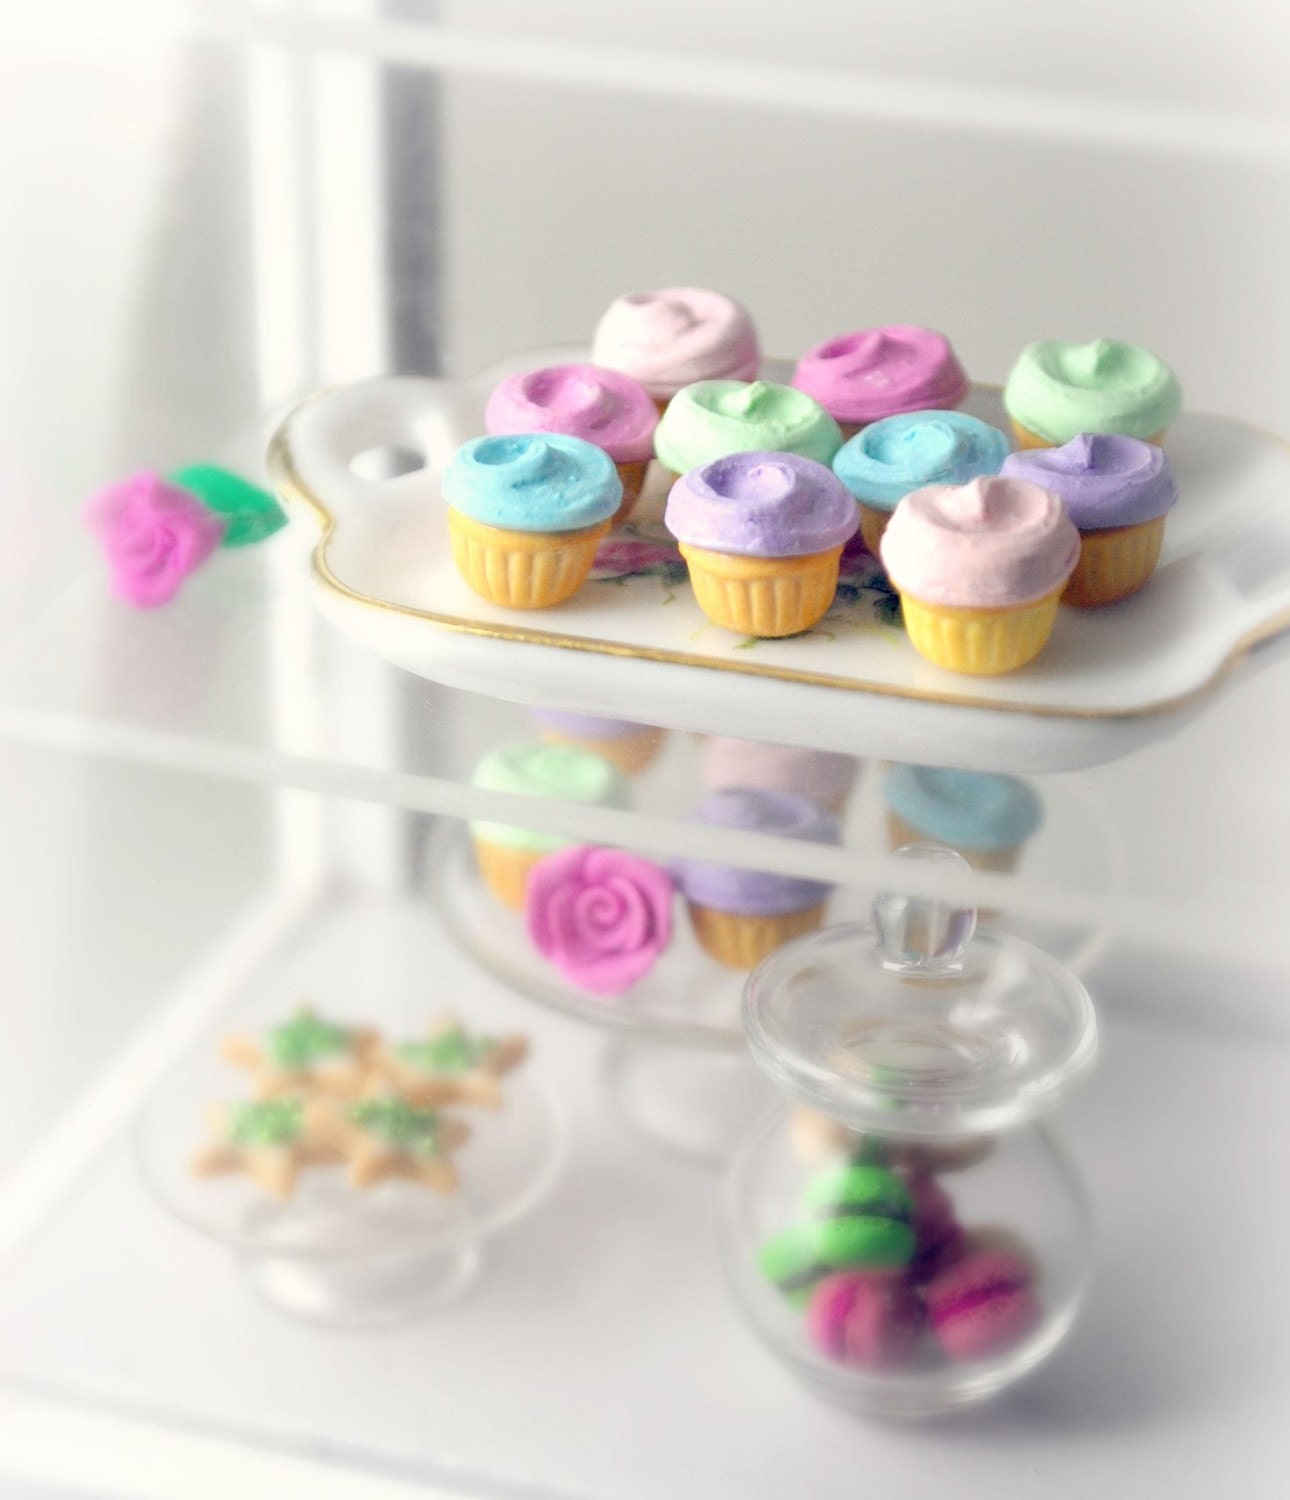 12th Scale Dollhouse Pastel Polymer Clay Cupcakes in a Porcelain Tray